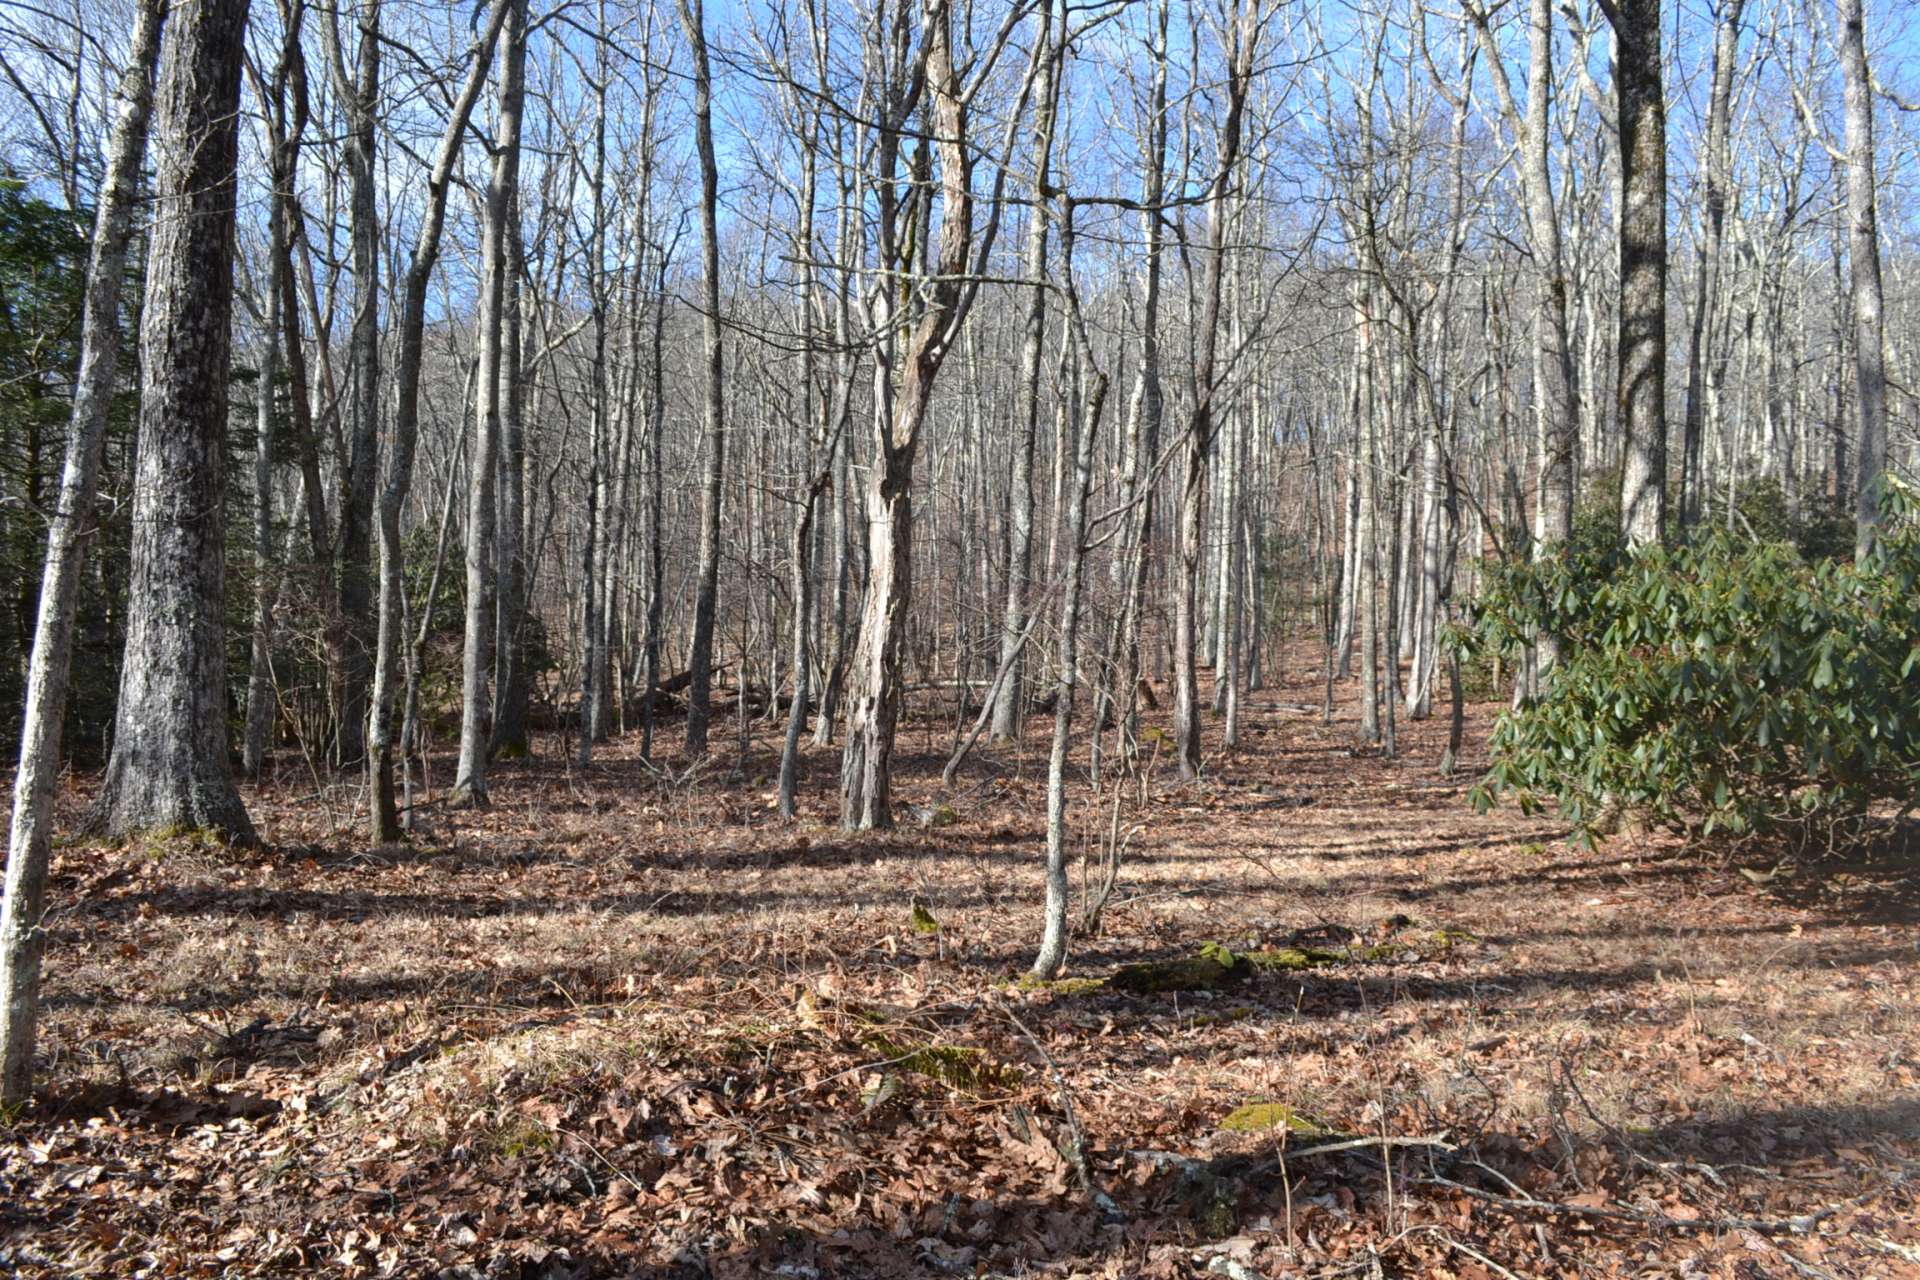 The terrain is mixed with native hardwoods, evergreens and mountain foliage, the perfect habitat for a diverse variety of wildlife that includes deer, turkey, and bear.